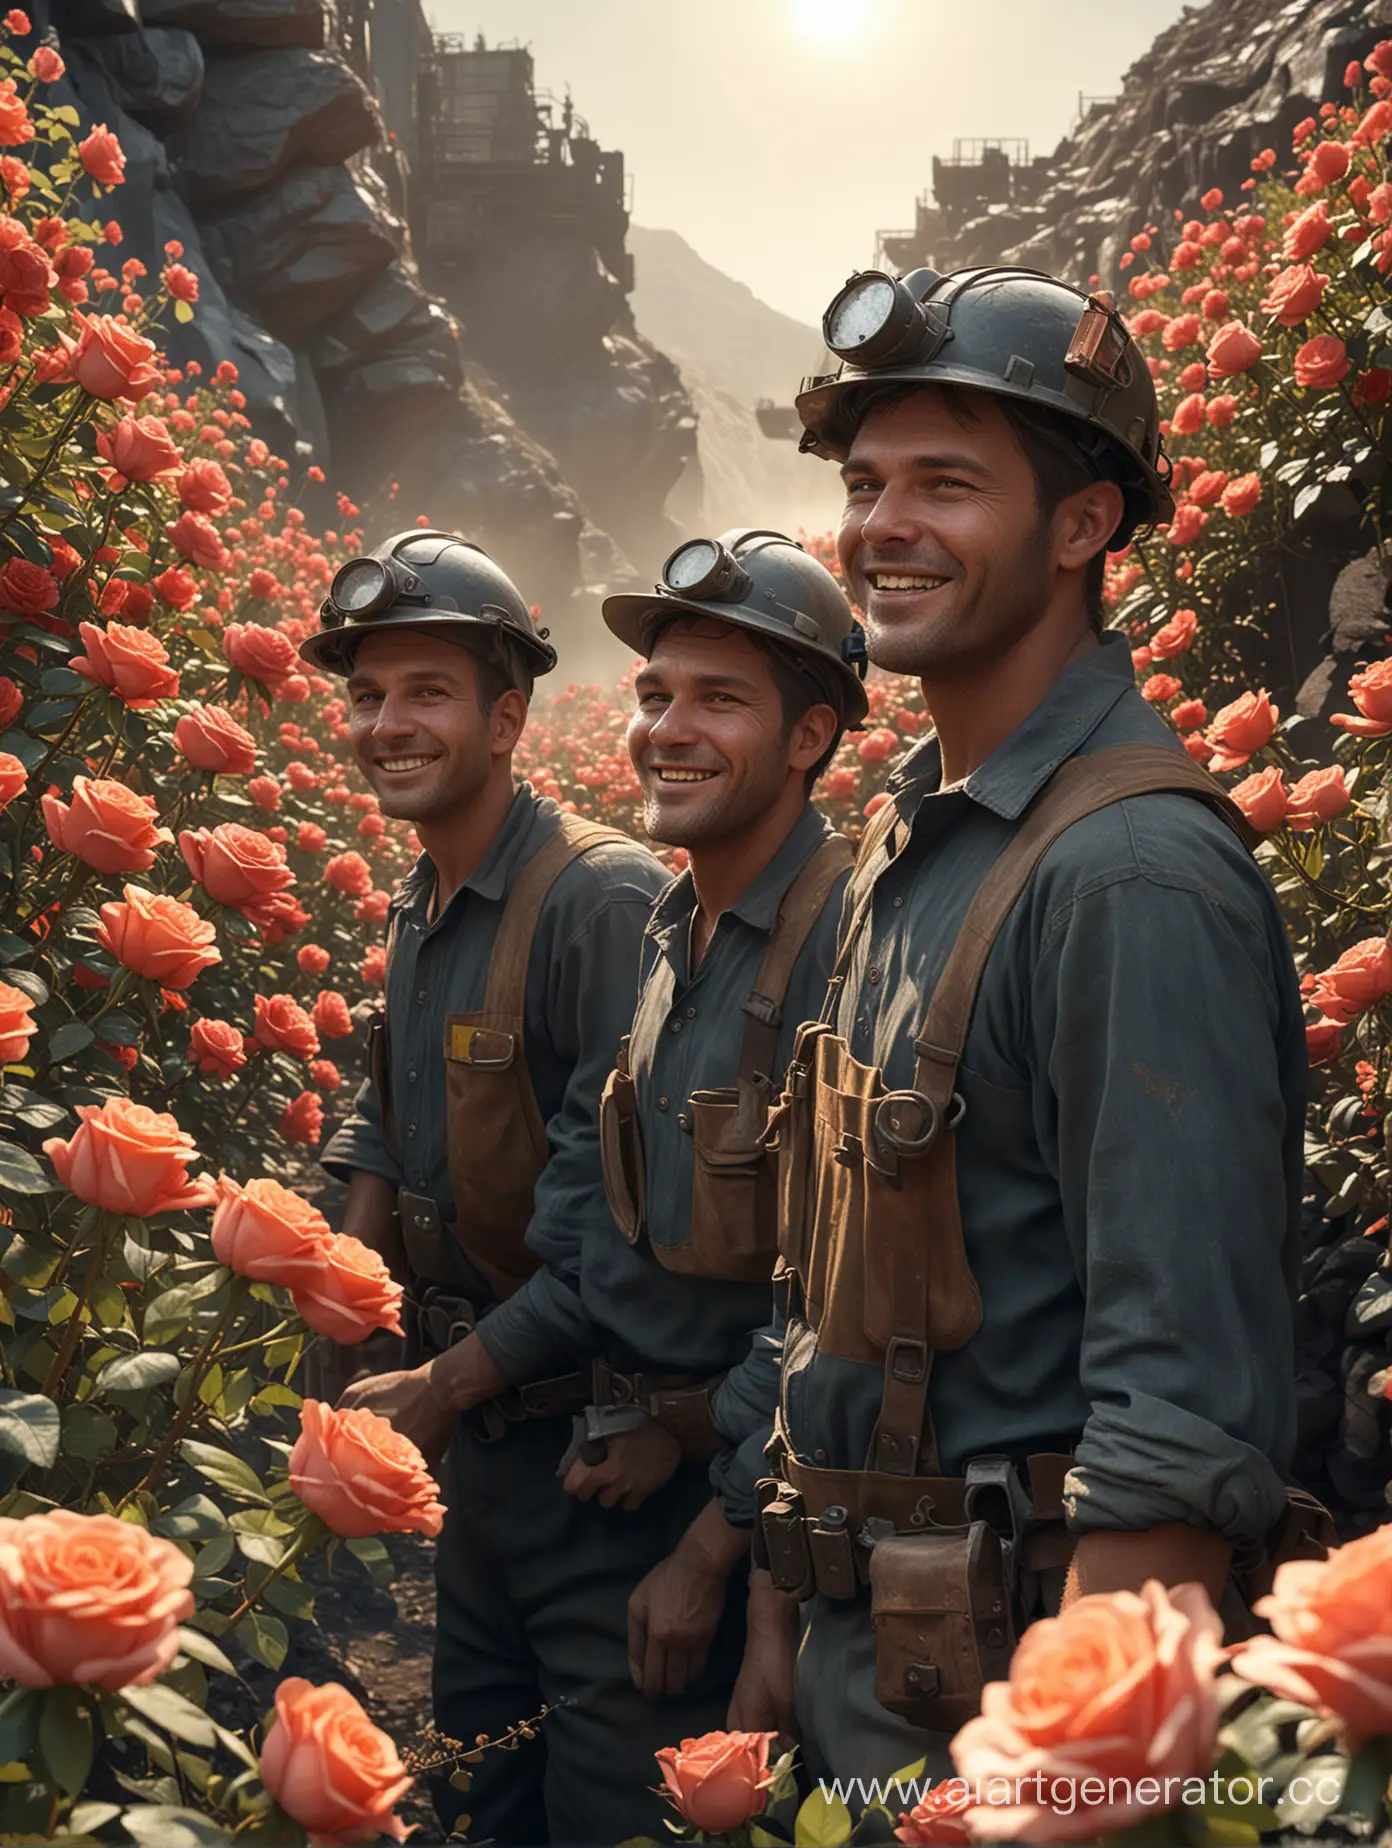 Happy-Miners-in-a-RoseOvergrown-Coal-Mine-Under-Bright-Sunshine